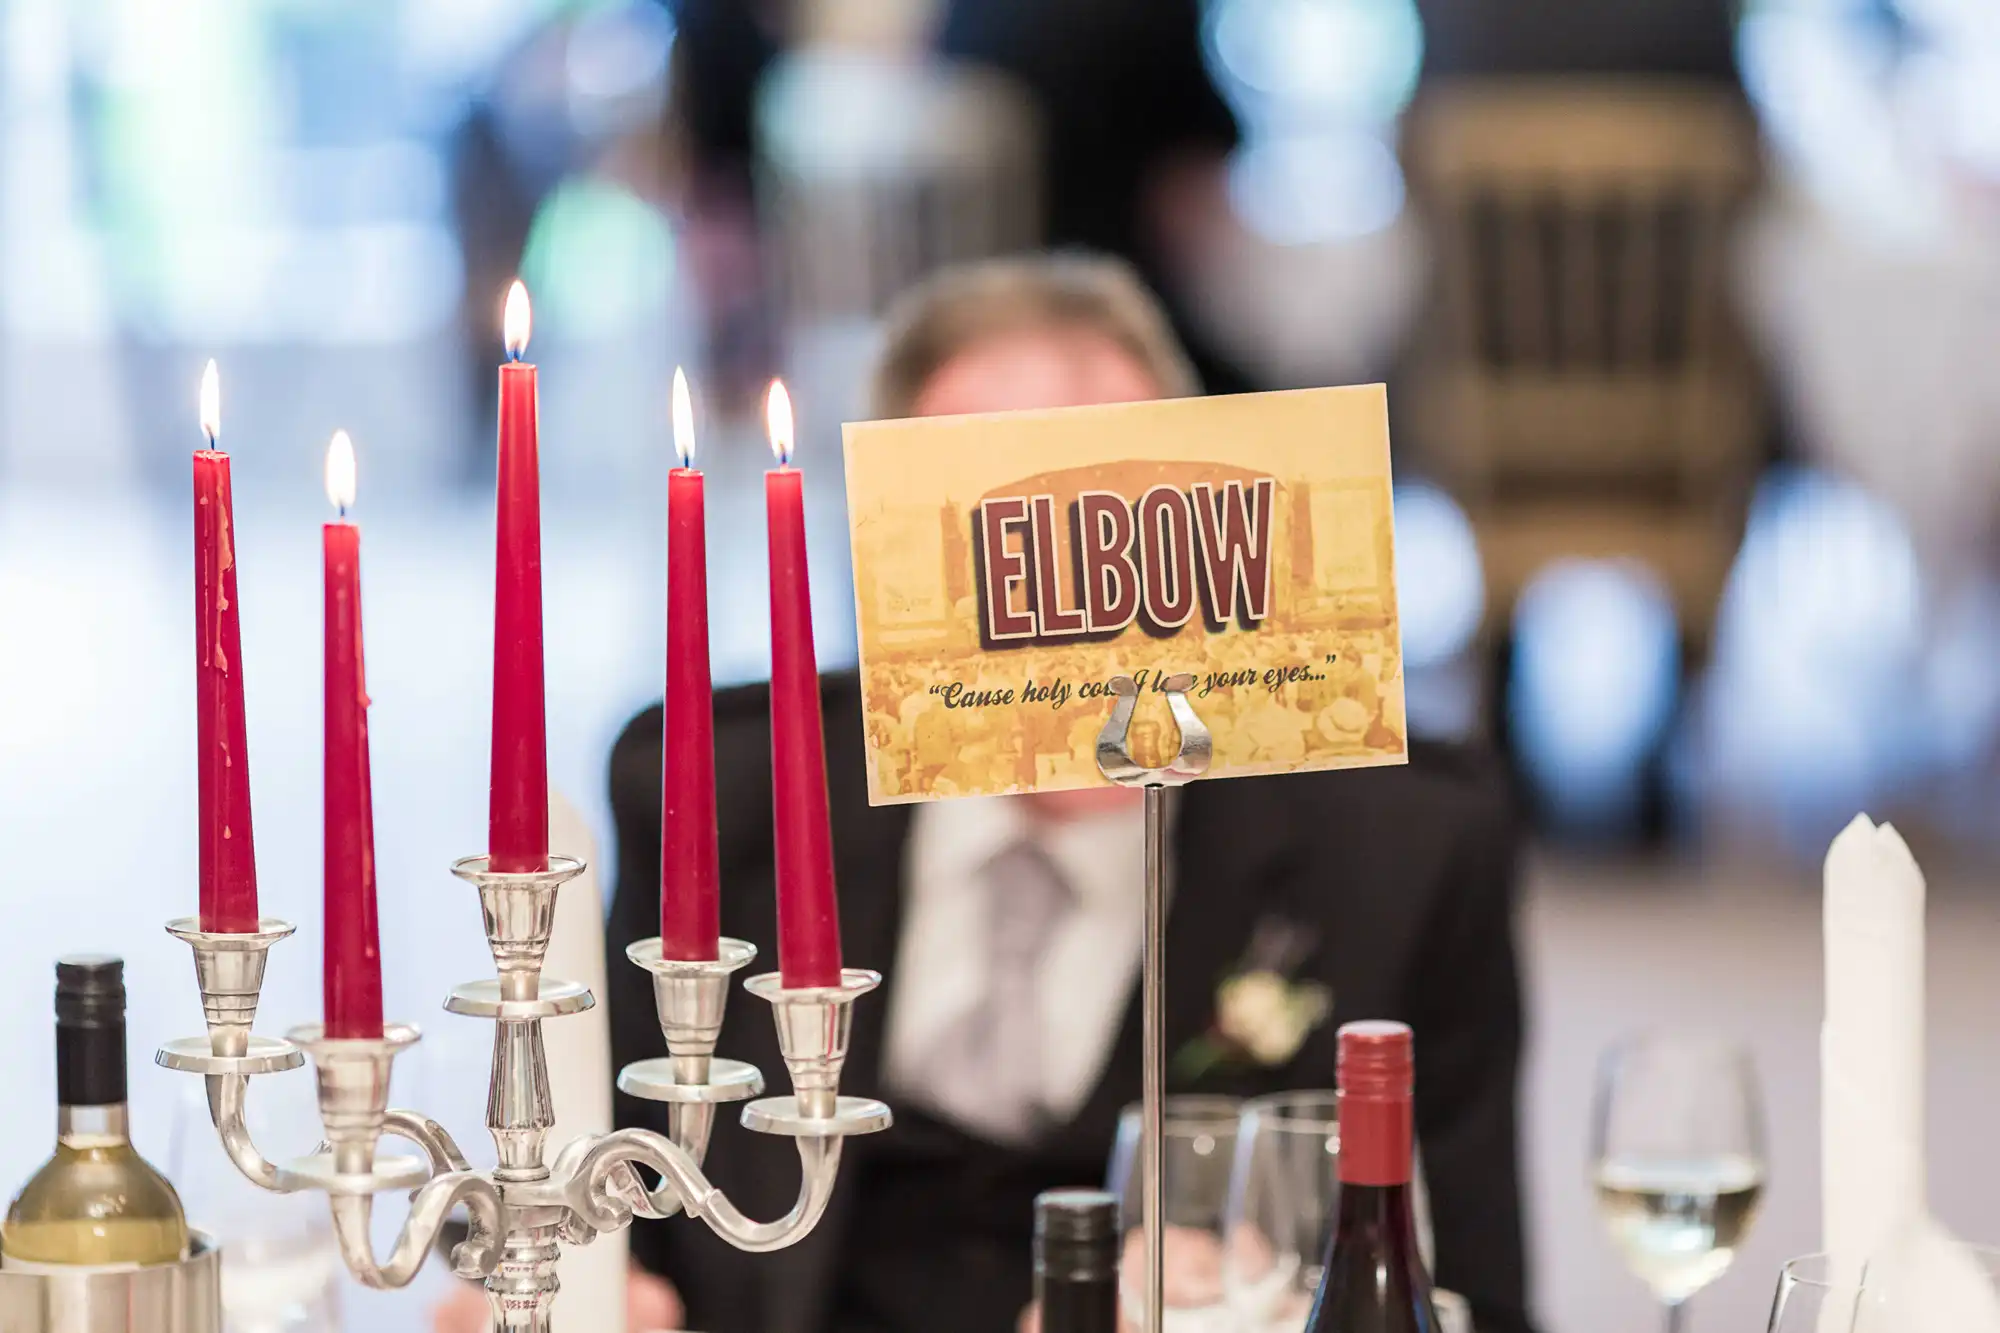 Elegant dining table setting with a silver candelabra holding red candles, a table sign reading "elbow," and blurred guest in the background.